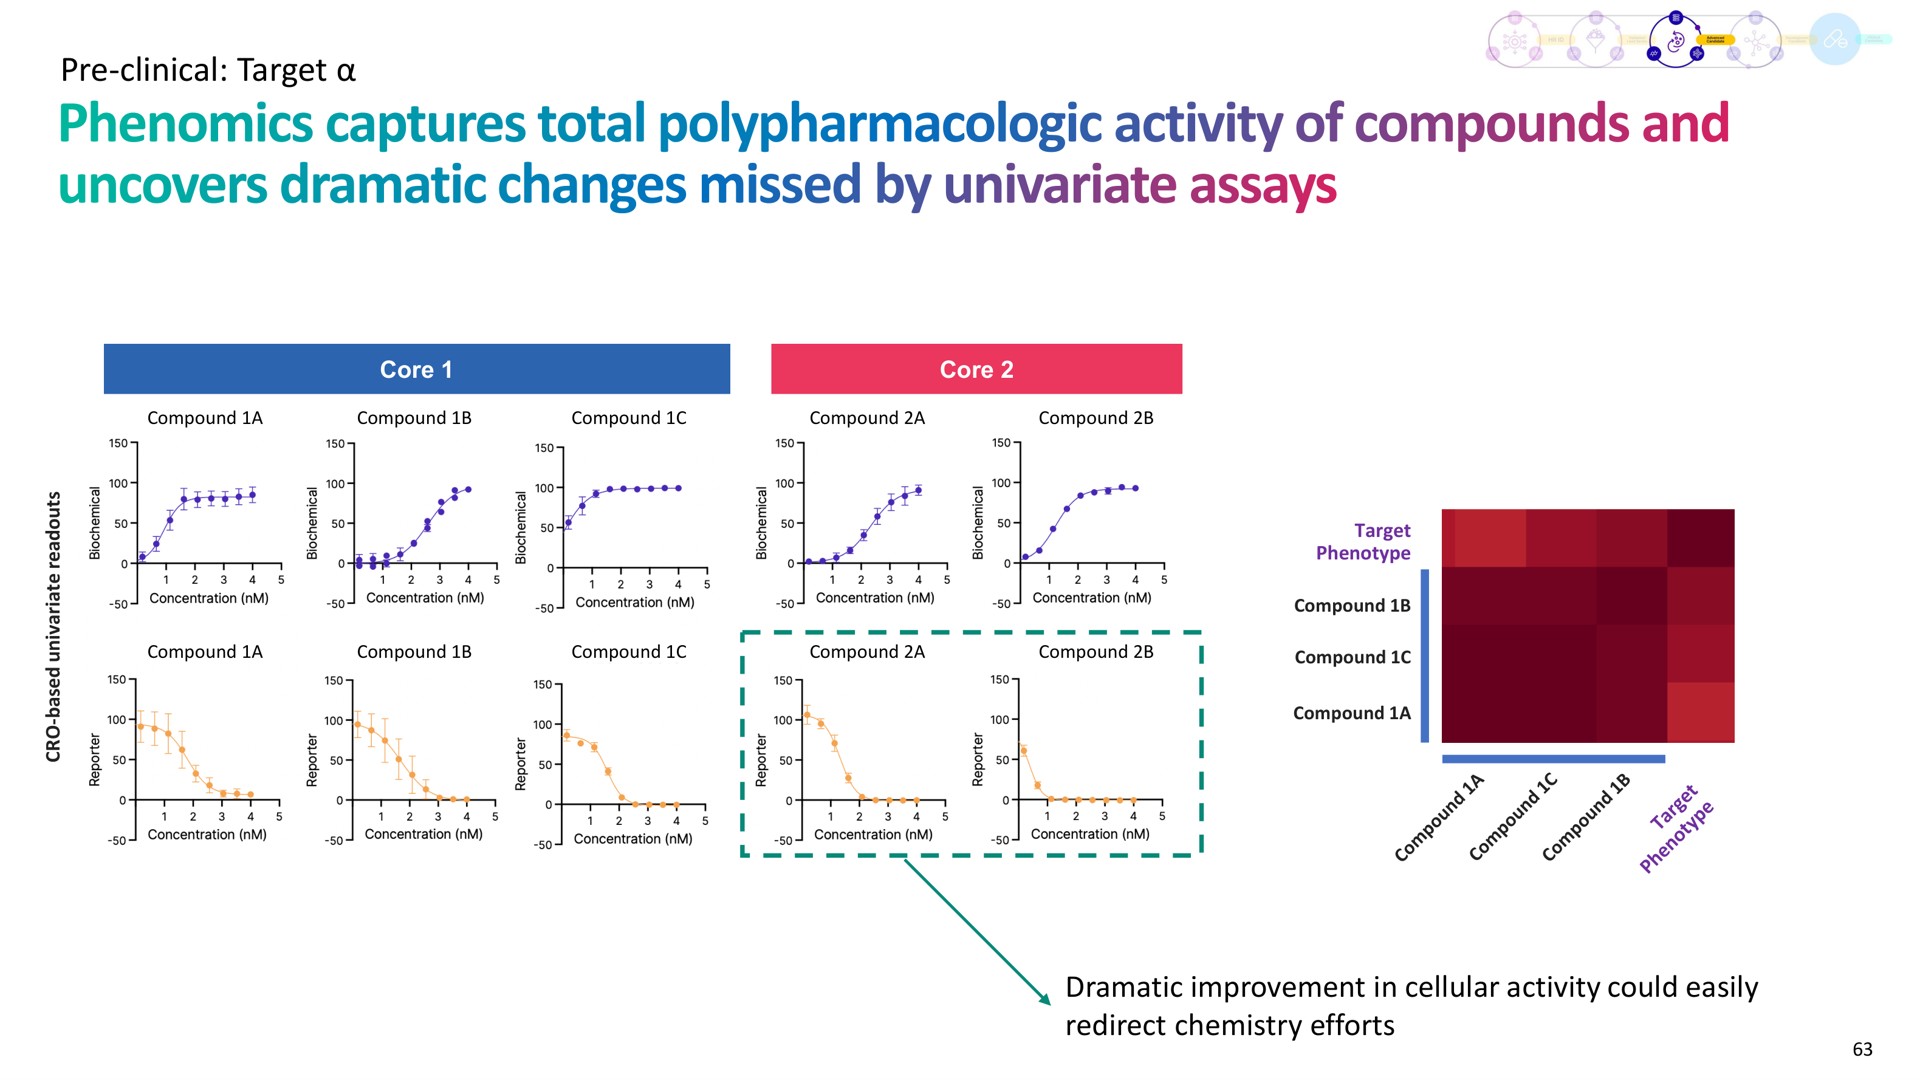 clinical target dramatic improvement in cellular activity could easily redirect chemistry efforts captures total of compounds and uncovers changes missed by assays | Recursion Pharmaceuticals